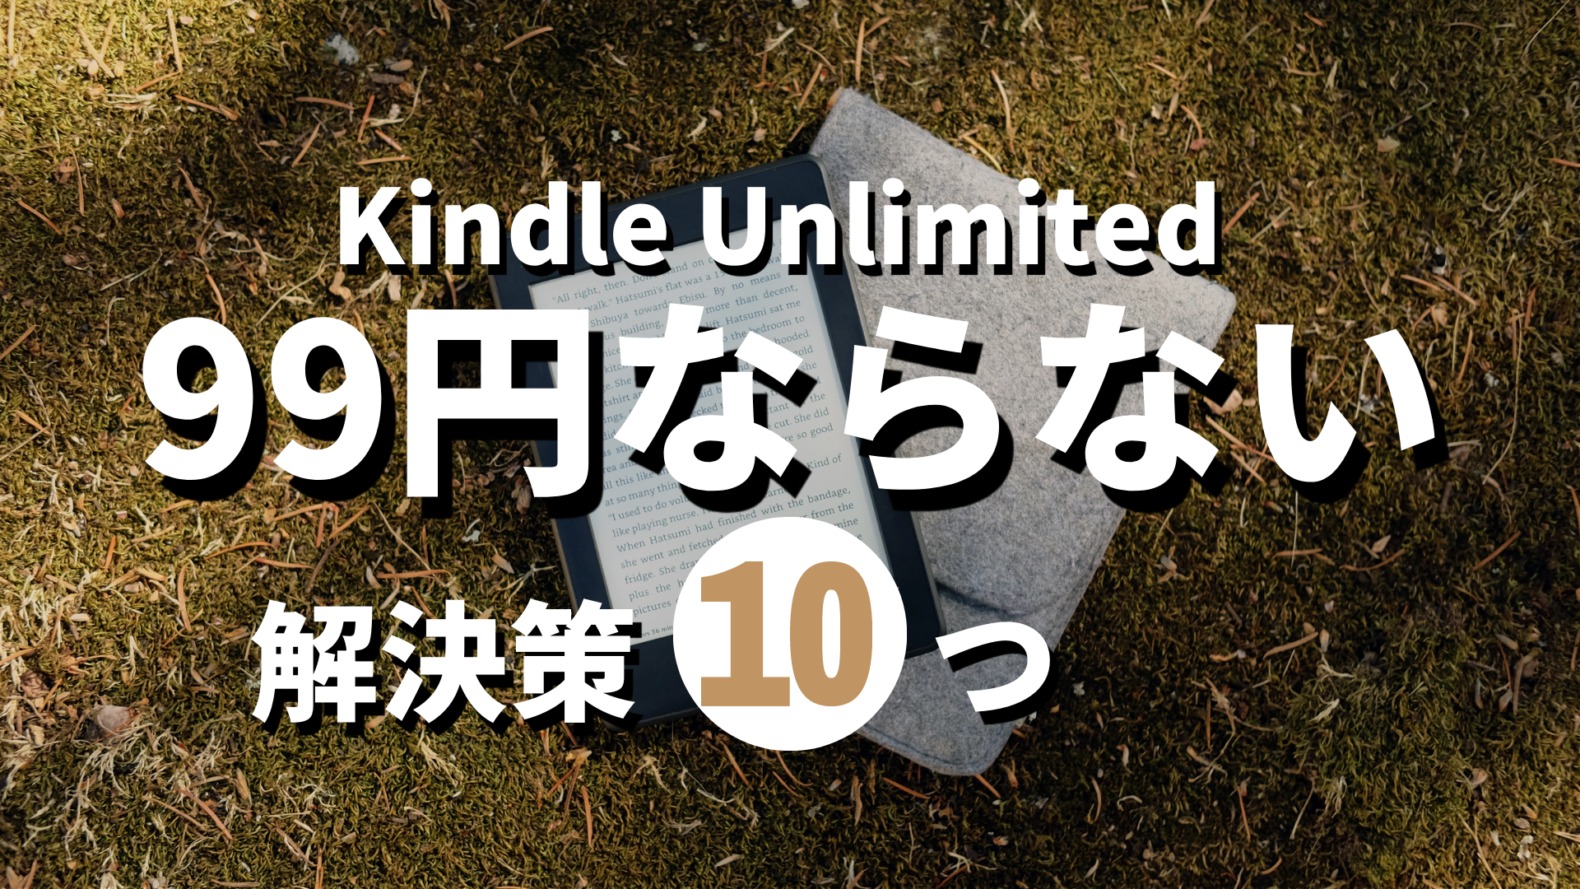 Kindle Unlimited99円にならない記事のサムネイル画像indle Unlimited99円にならない記事